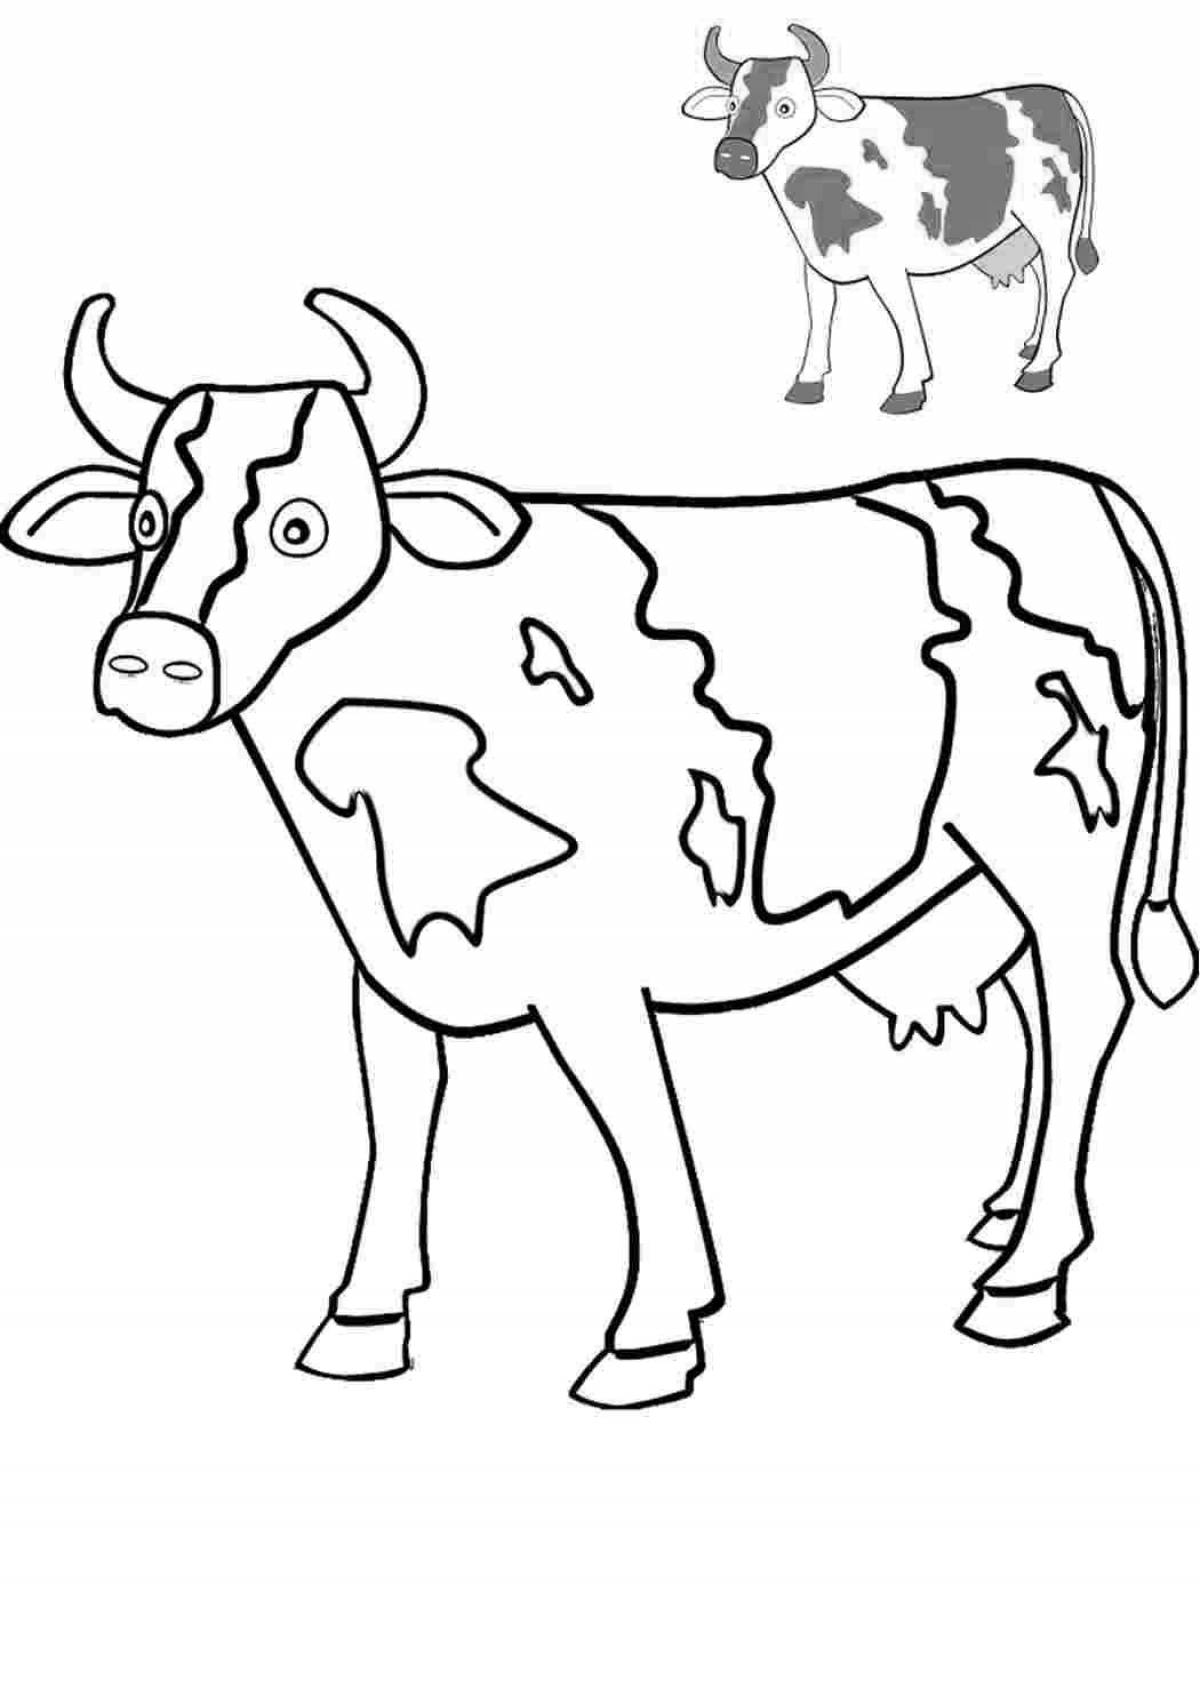 Funny yellow cow coloring book